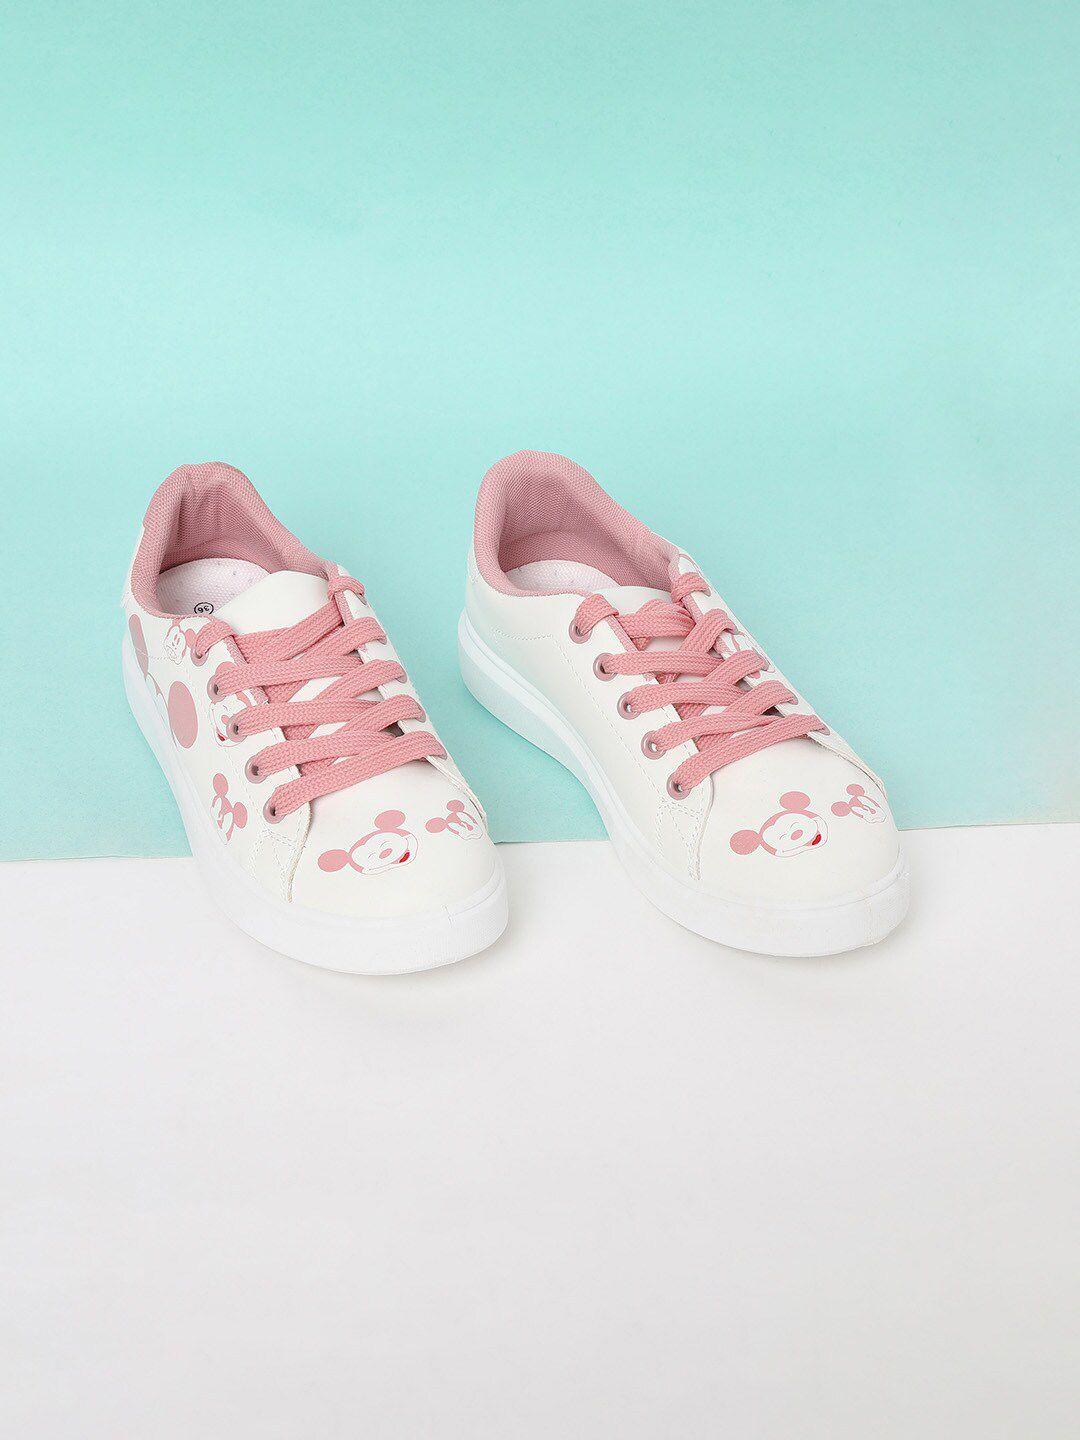 fame-forever-by-lifestyle-girls-white-&-pink-mickey-mouse-printed-sneakers